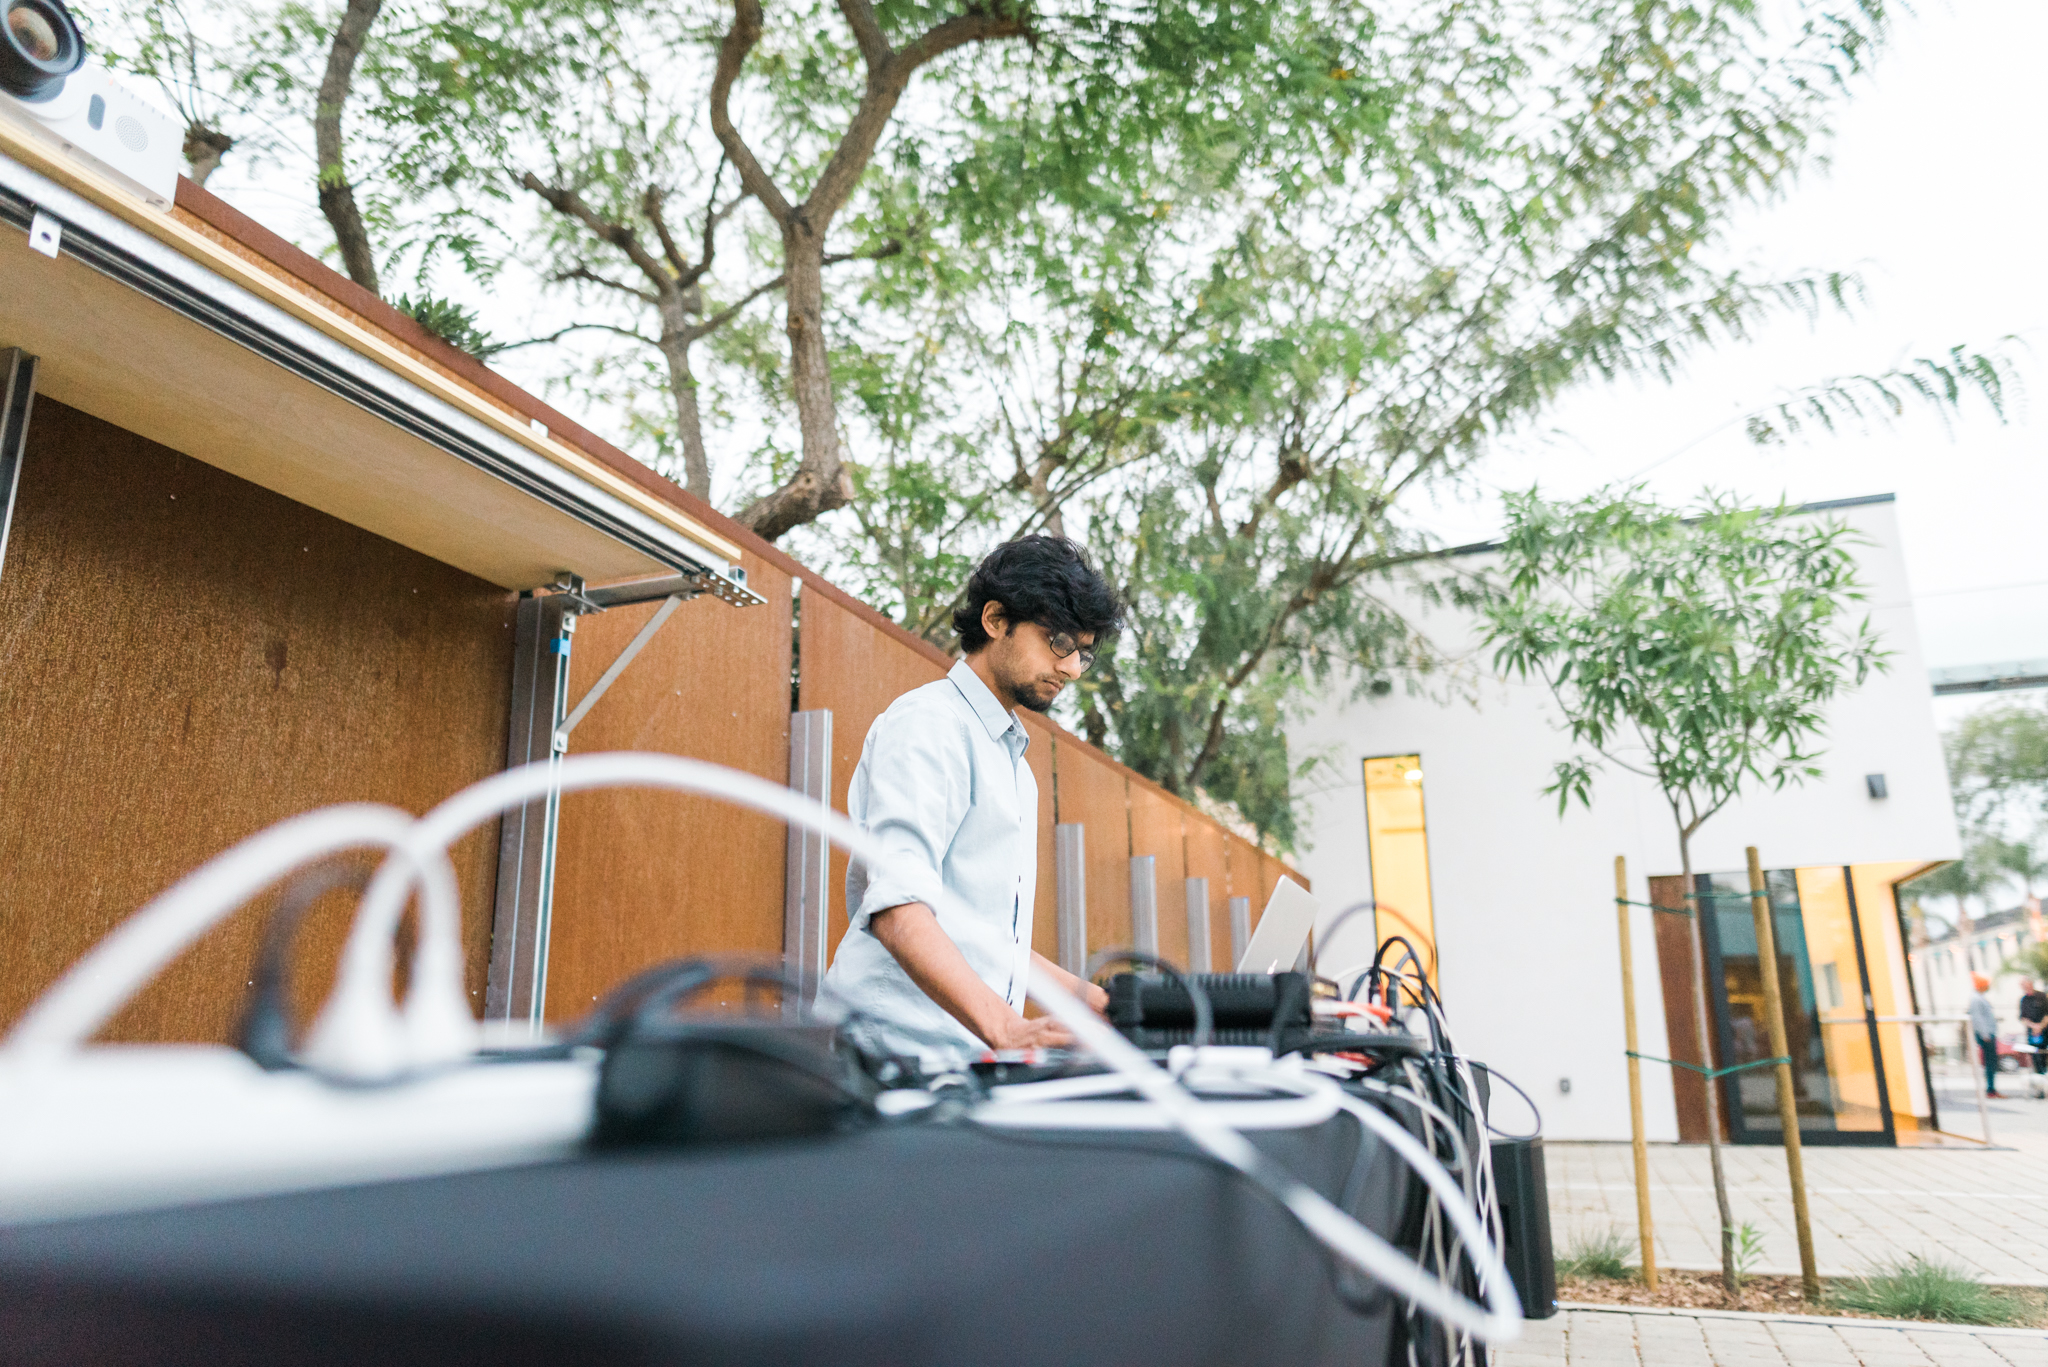 Performance at SBCAST on a quadraphonic setup with live-diffusion. Photograph by Mohit Hingorani.